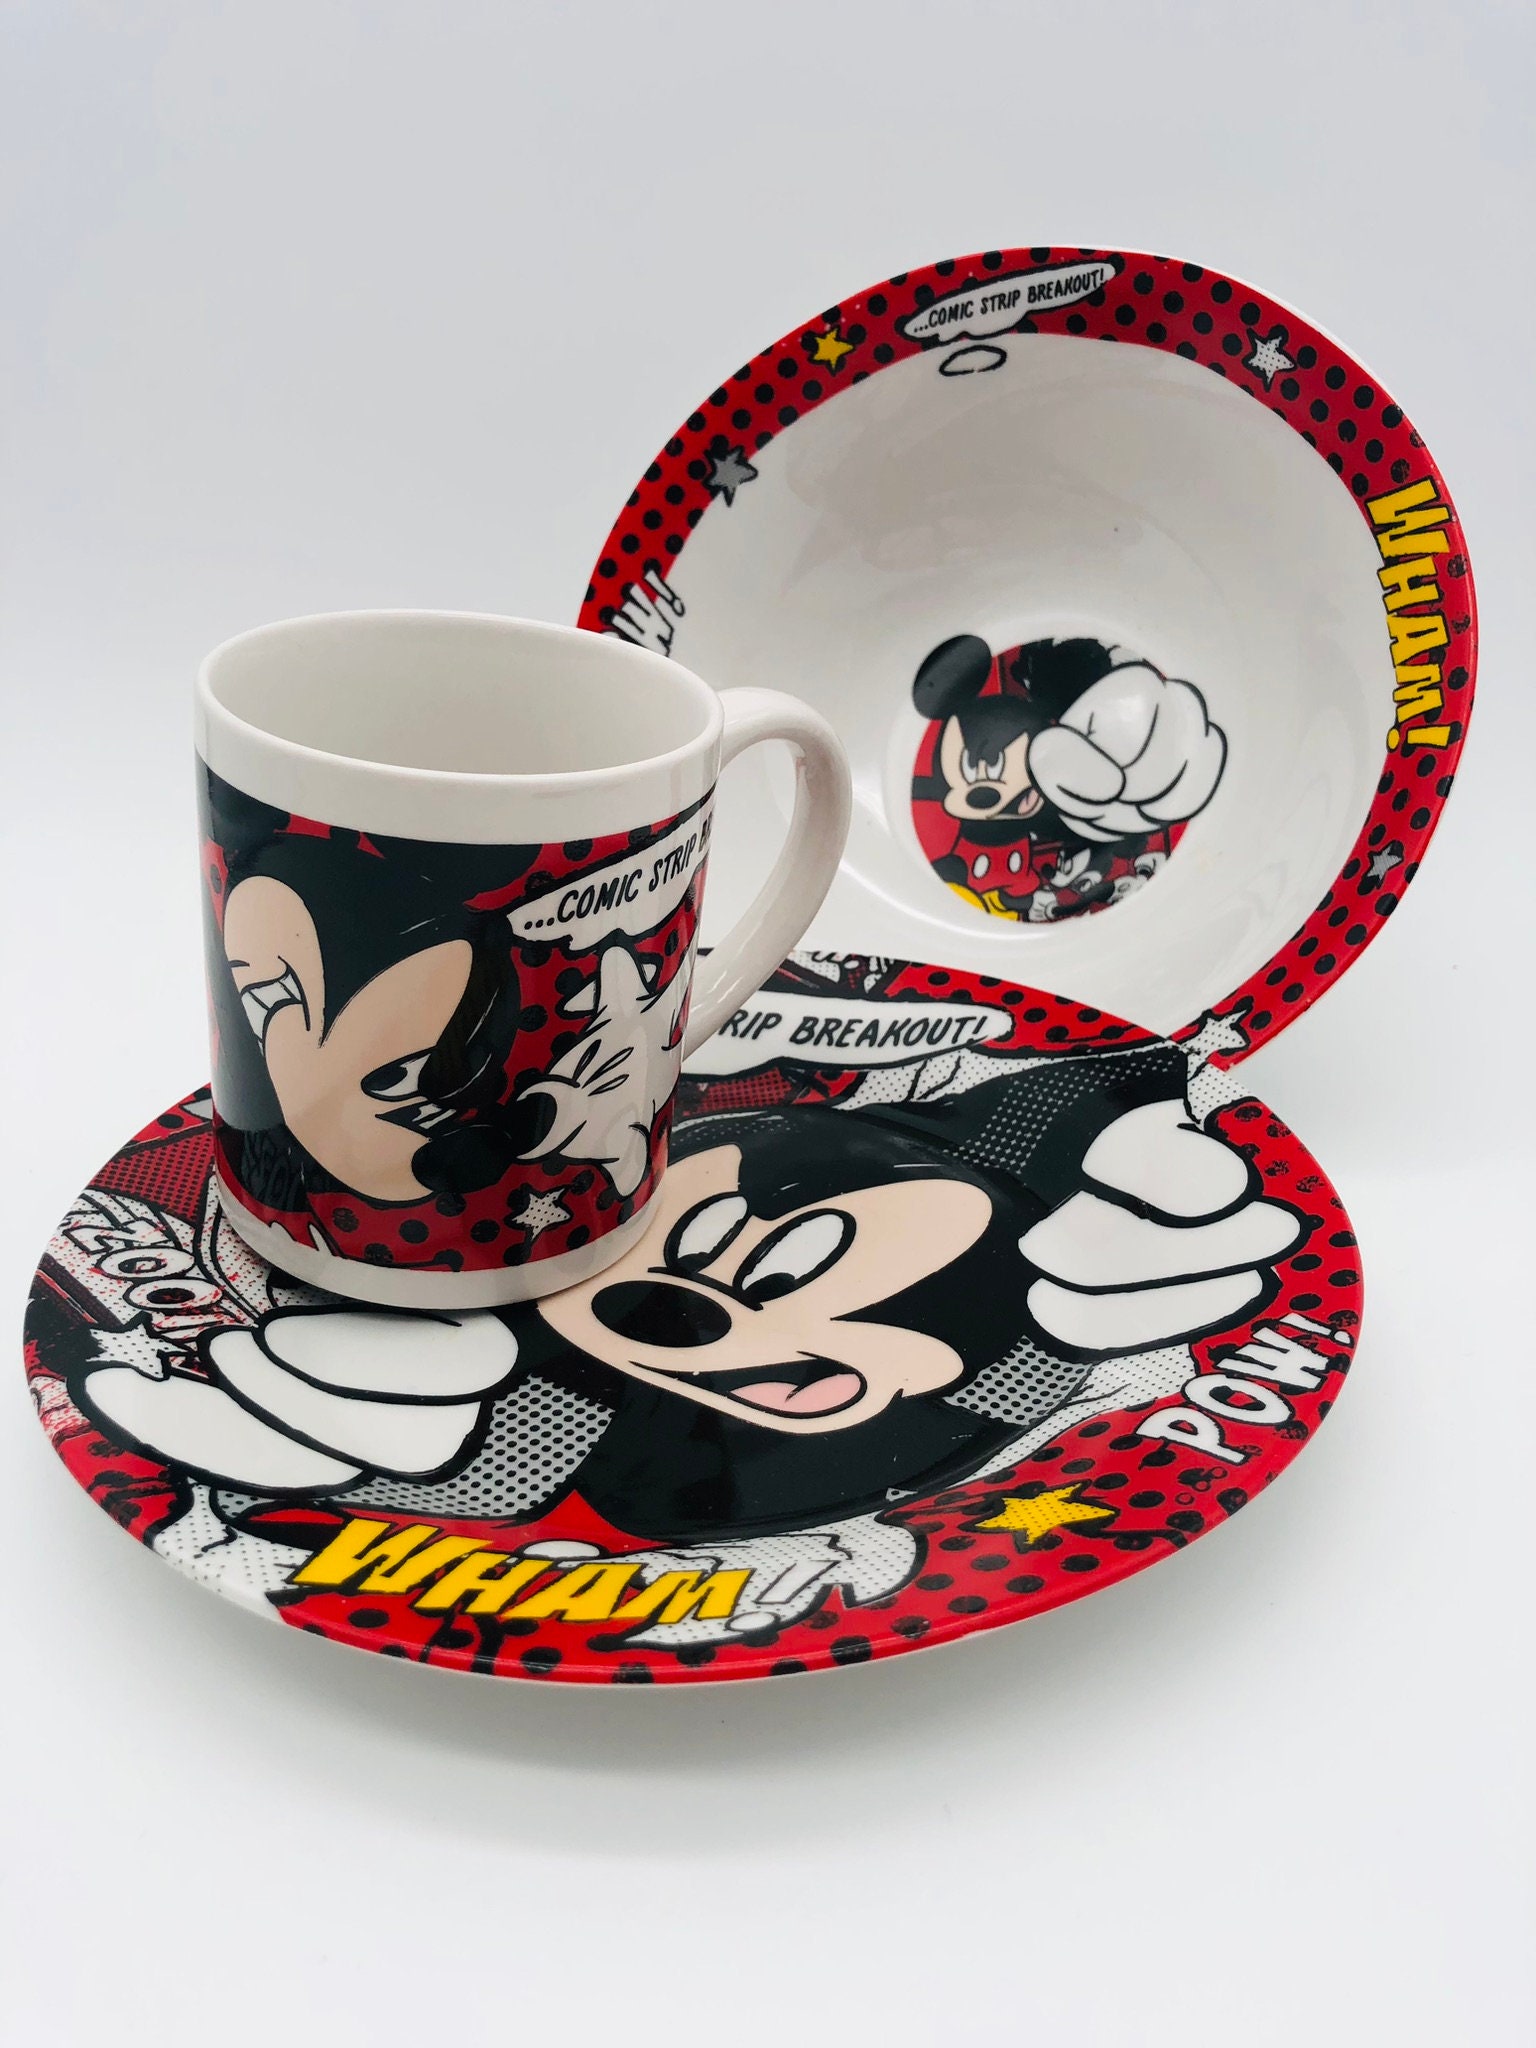 Executie Zo snel als een flits Master diploma Red Minnie Mouse Plates and Cups - Etsy